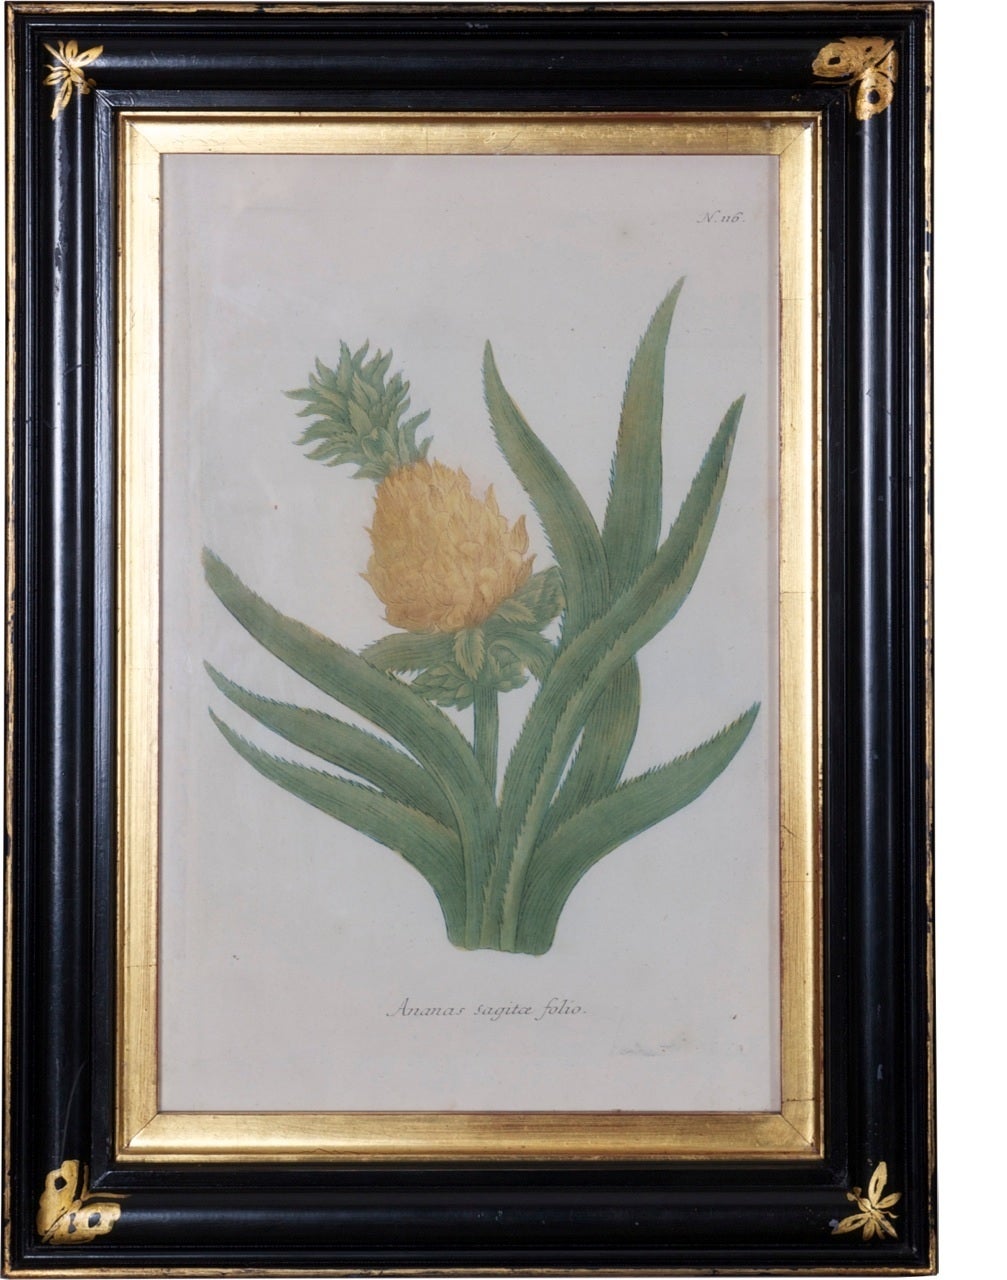 The set of 12 mezzotints of fruit and flowers part printed in color and finished by hand, all with margins, in black and gilt frames.

The plates generally in very good condition including studies of ananas, papaver, rotunda, masura and